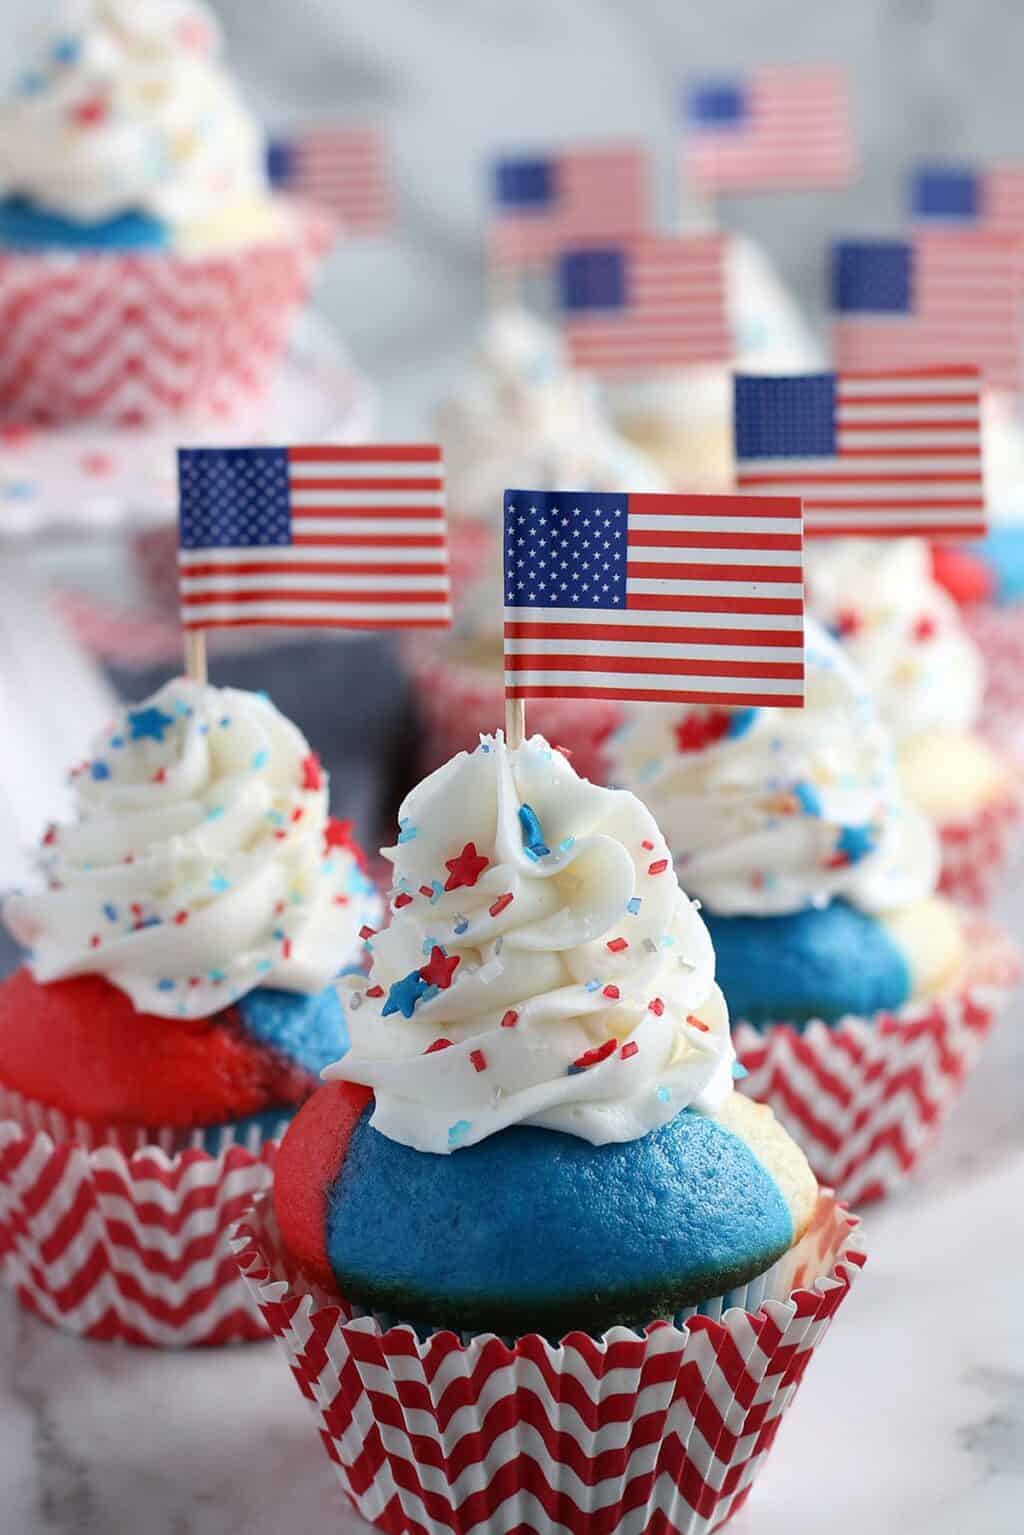 Delight Your Guests with 4th of July Cupcakes!